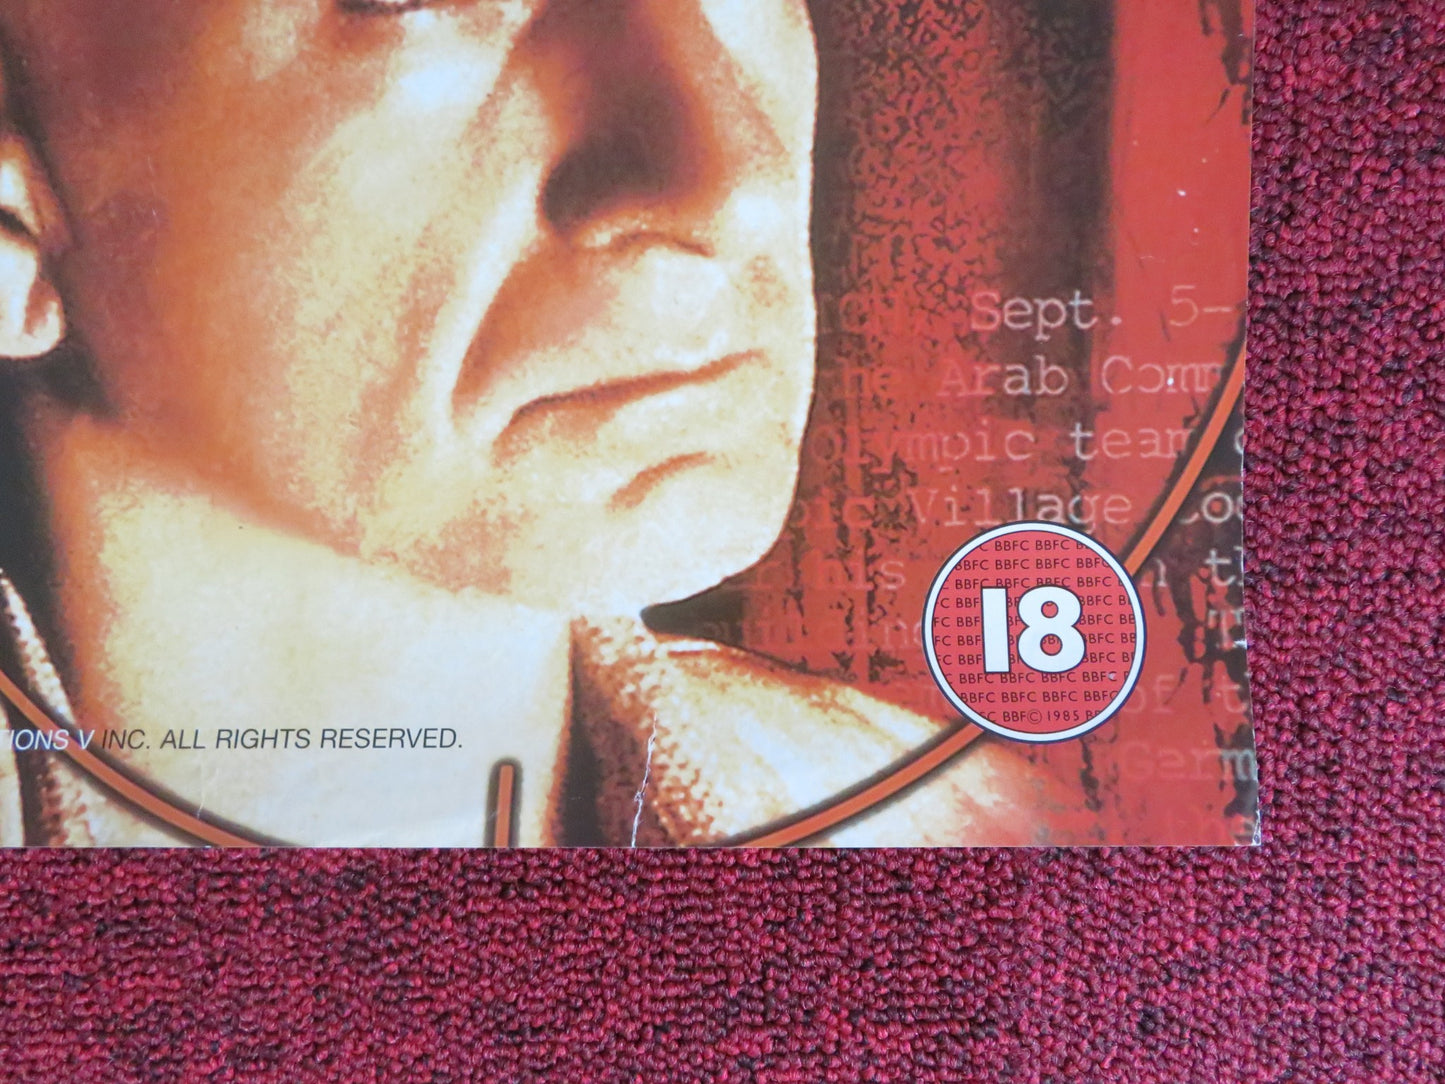 THE ASSIGNMENT VHS POSTER POSTER AIDAN QUINN DONALD SUTHERLAND 1997